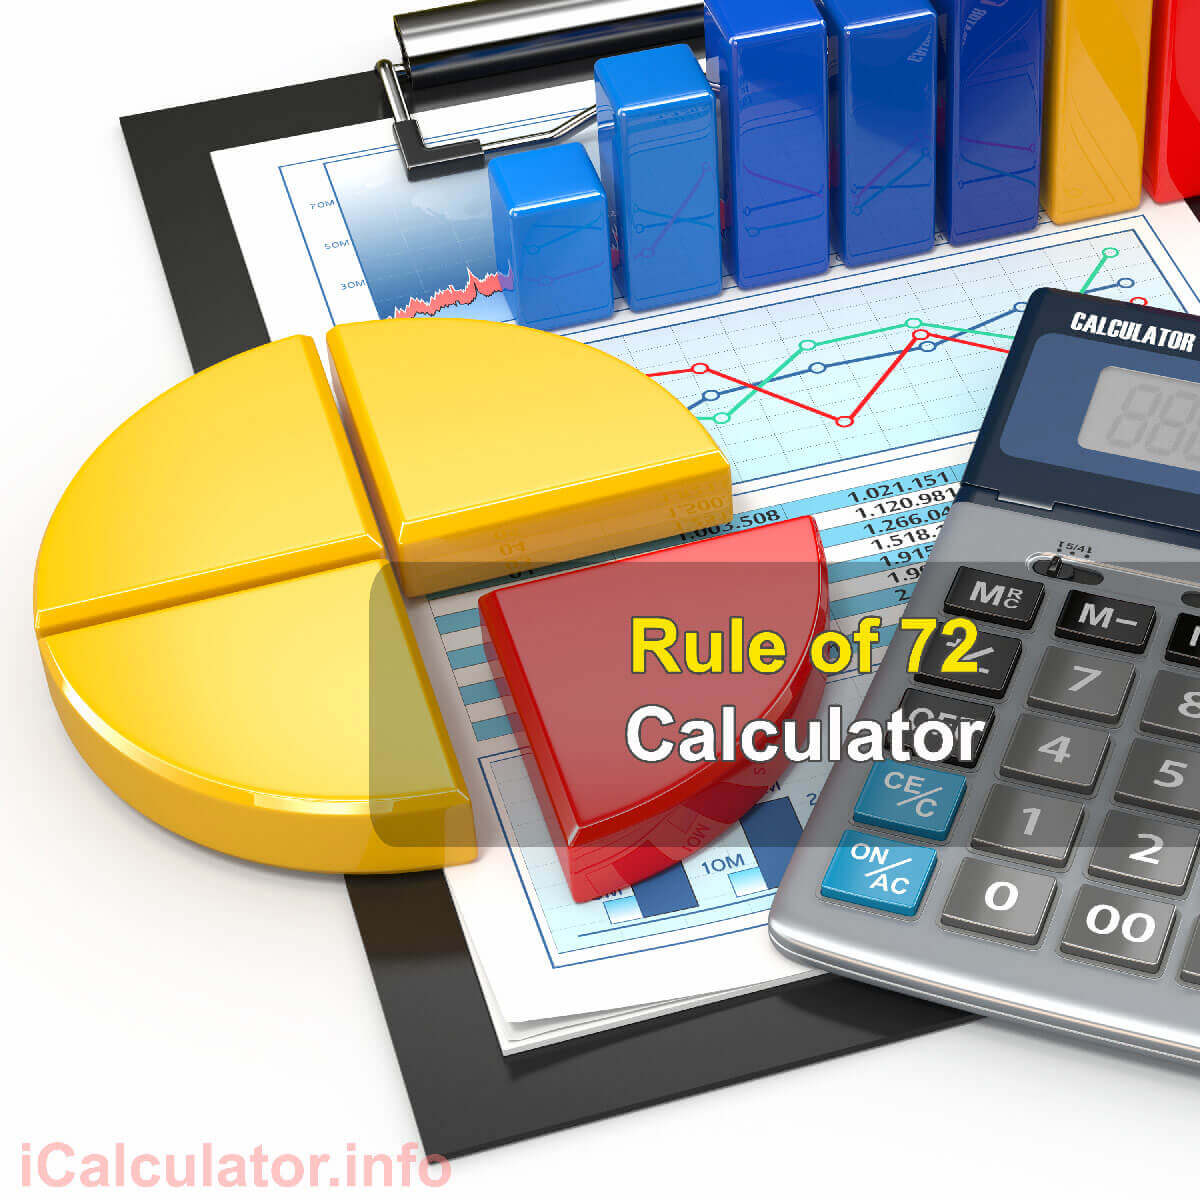 Rule of 72 Calculator. This image provides details of how to calculate the rule of 72 using a calculator and notepad. By using the rule of 72 formula, the Rule of 72 Calculator provides a true calculation of the interest rate on an investment and/or personal and home loans.